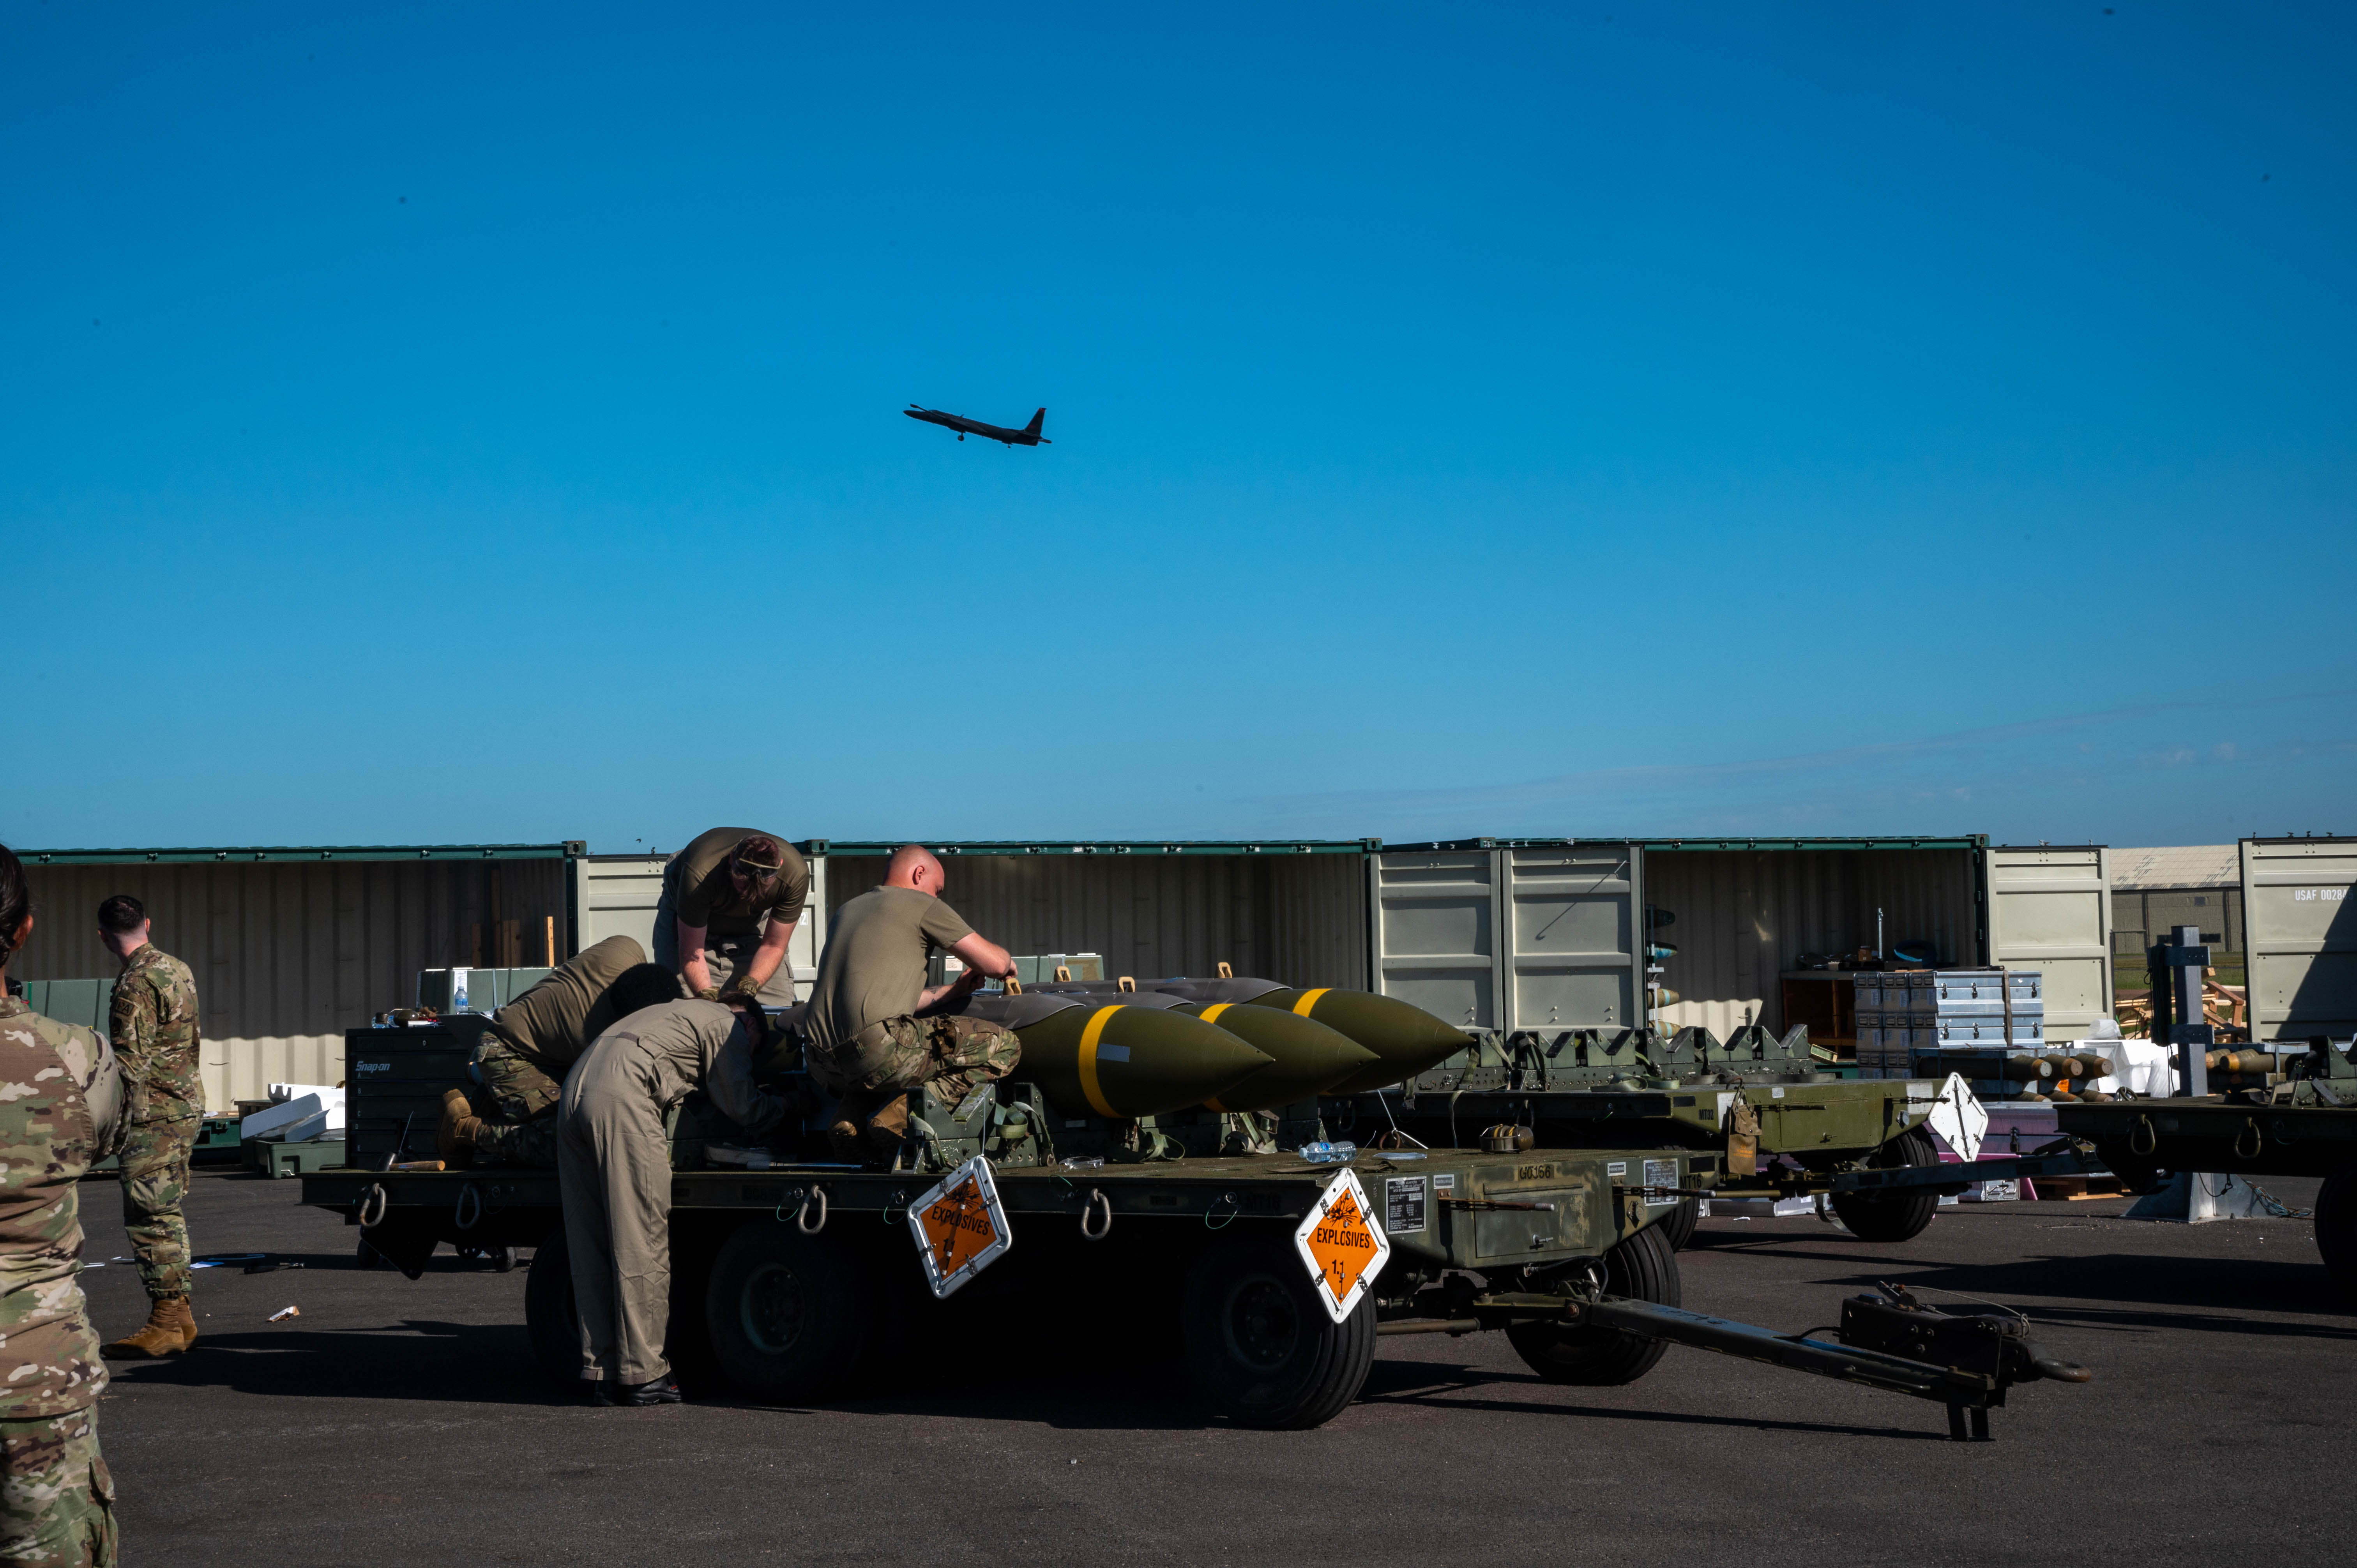 Military personnel strapping armaments to a trailer, with an aircraft flying overhead